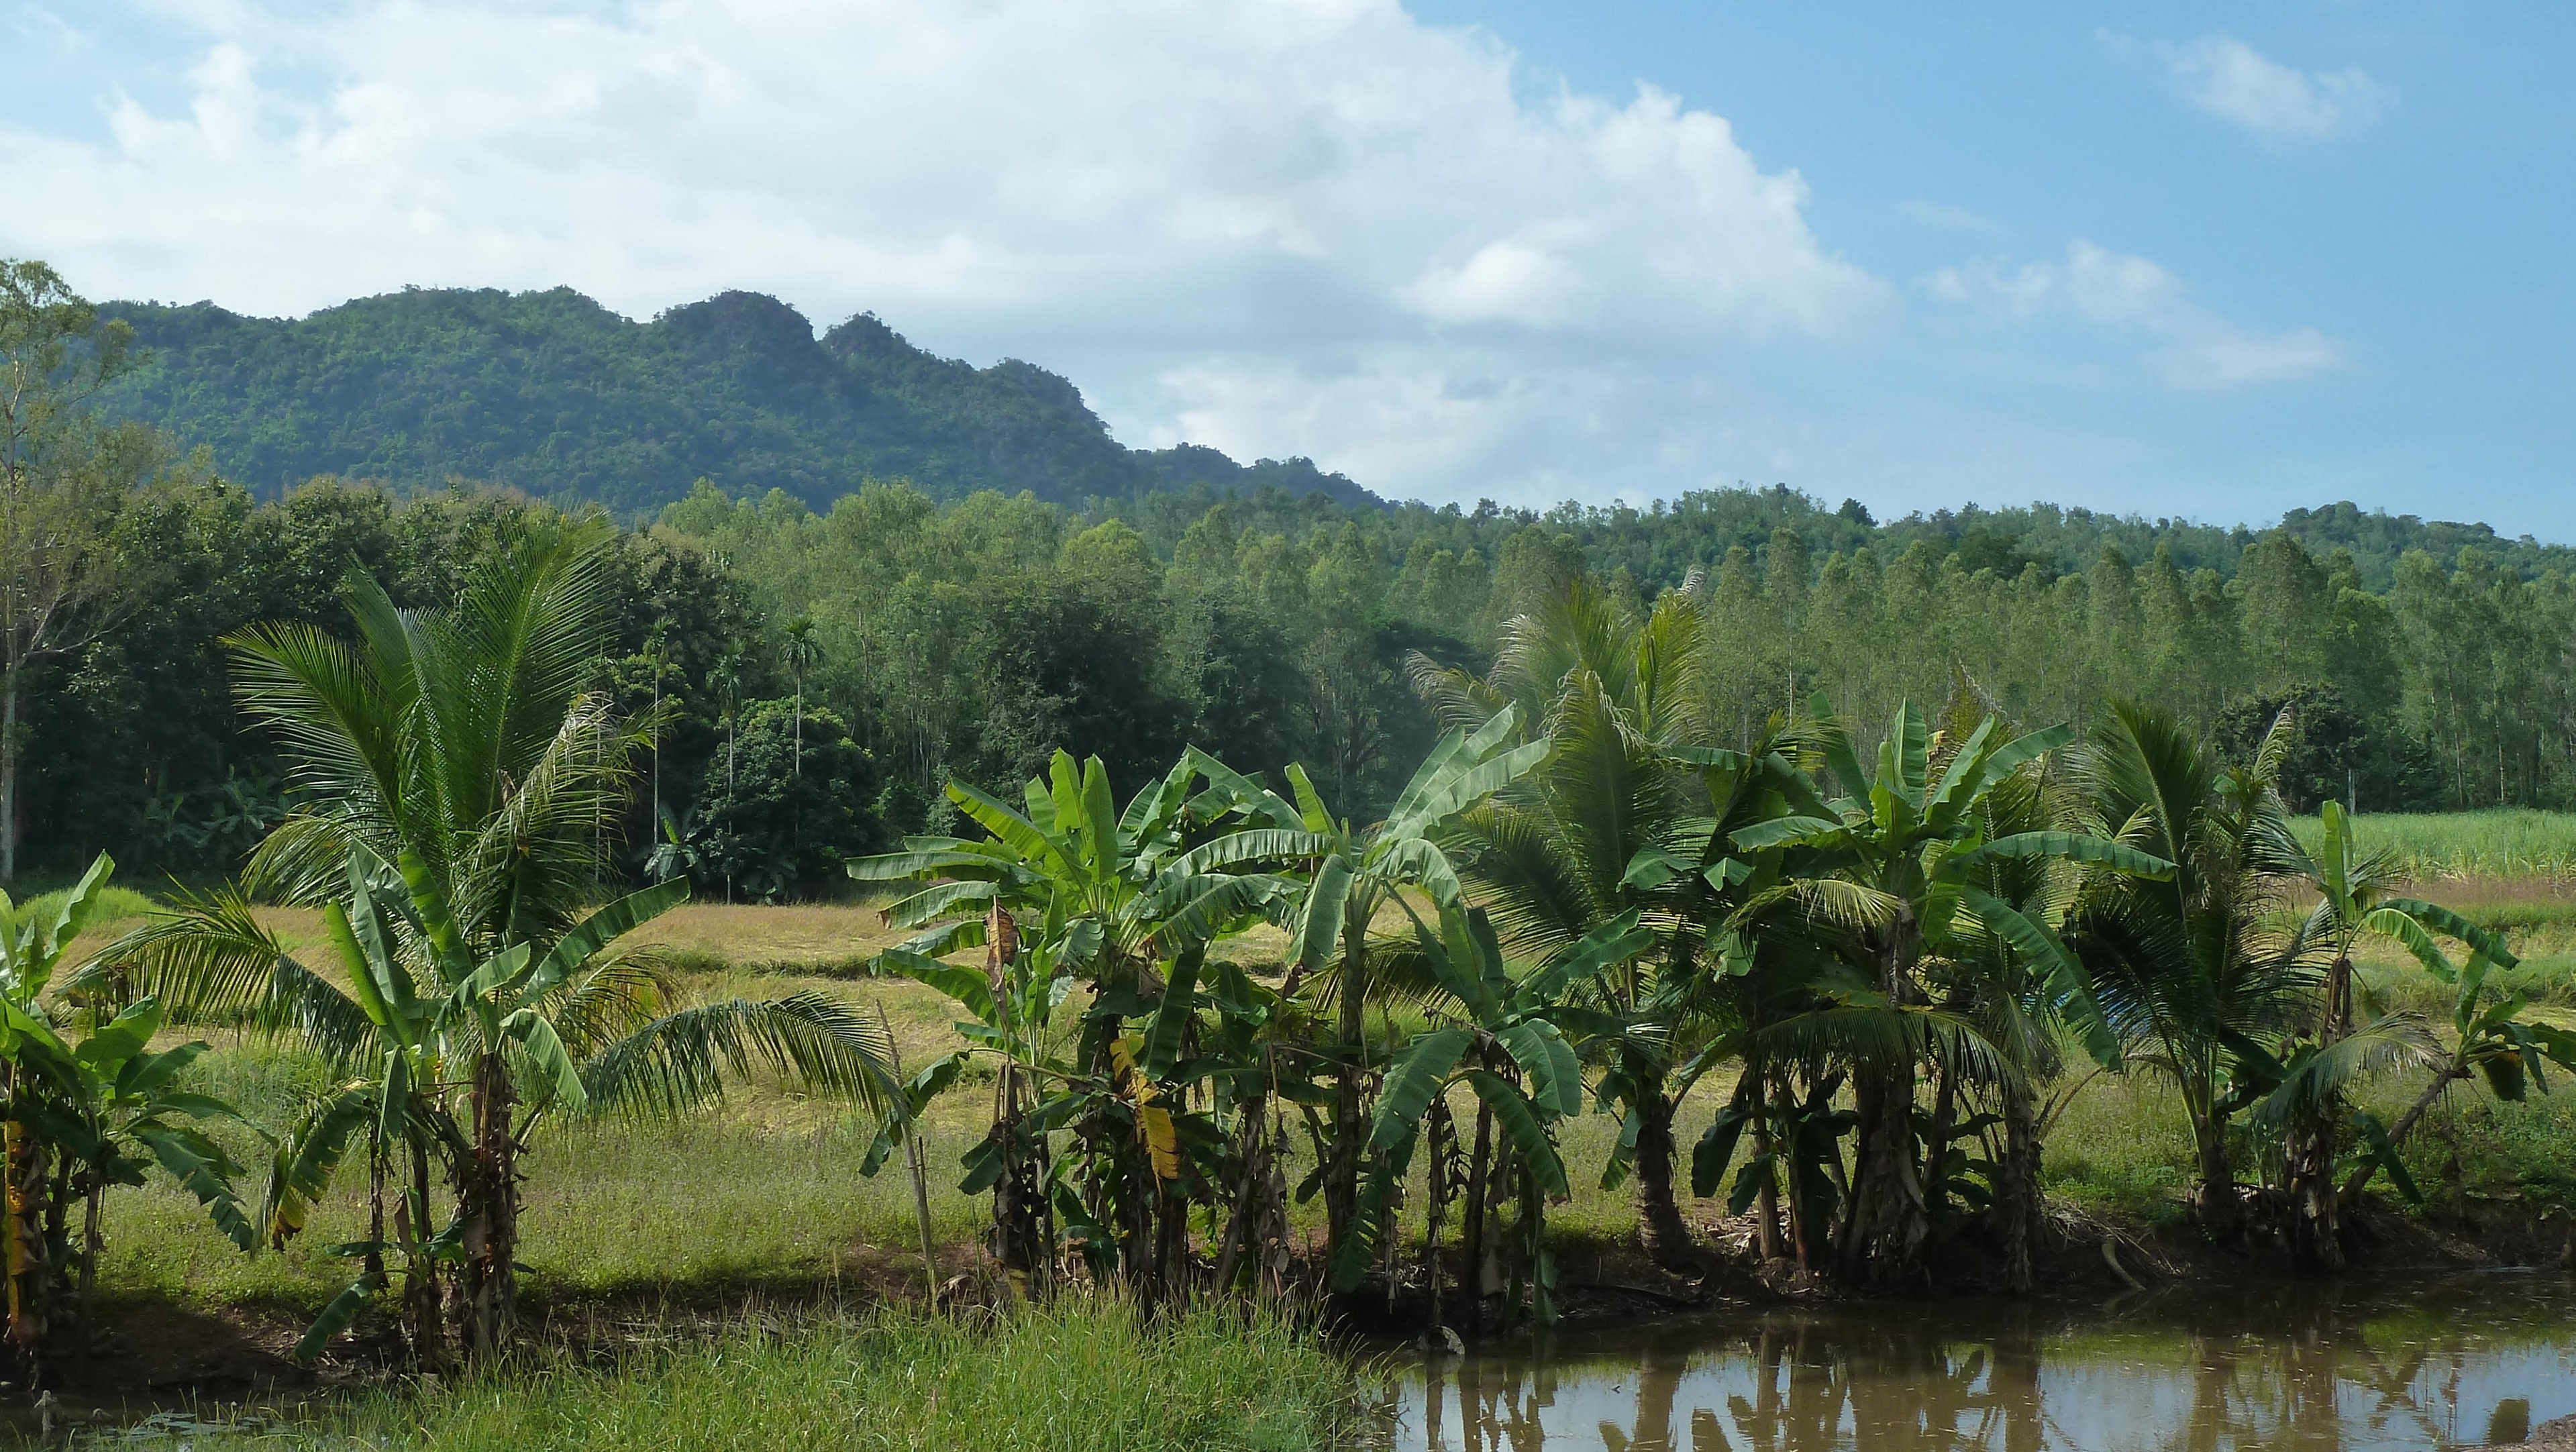 A recovered family farm in Thailand